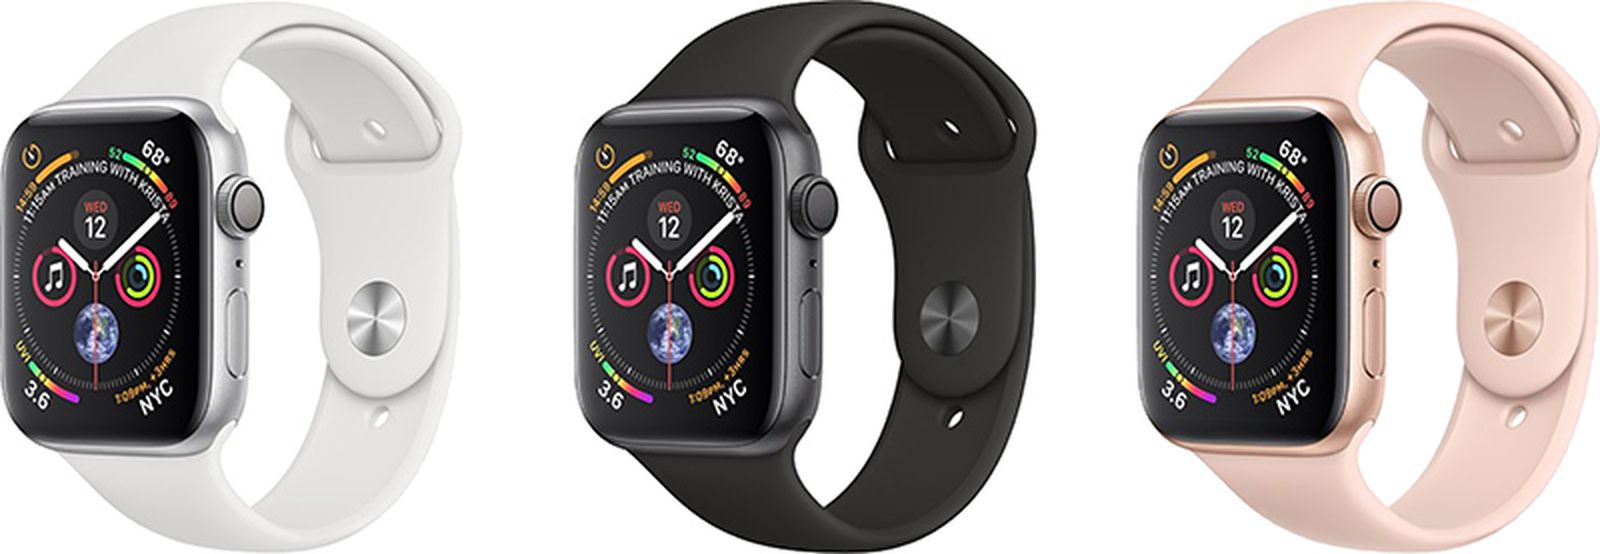 Black Friday 2018: Best Deals on the Apple Watch and Accessories